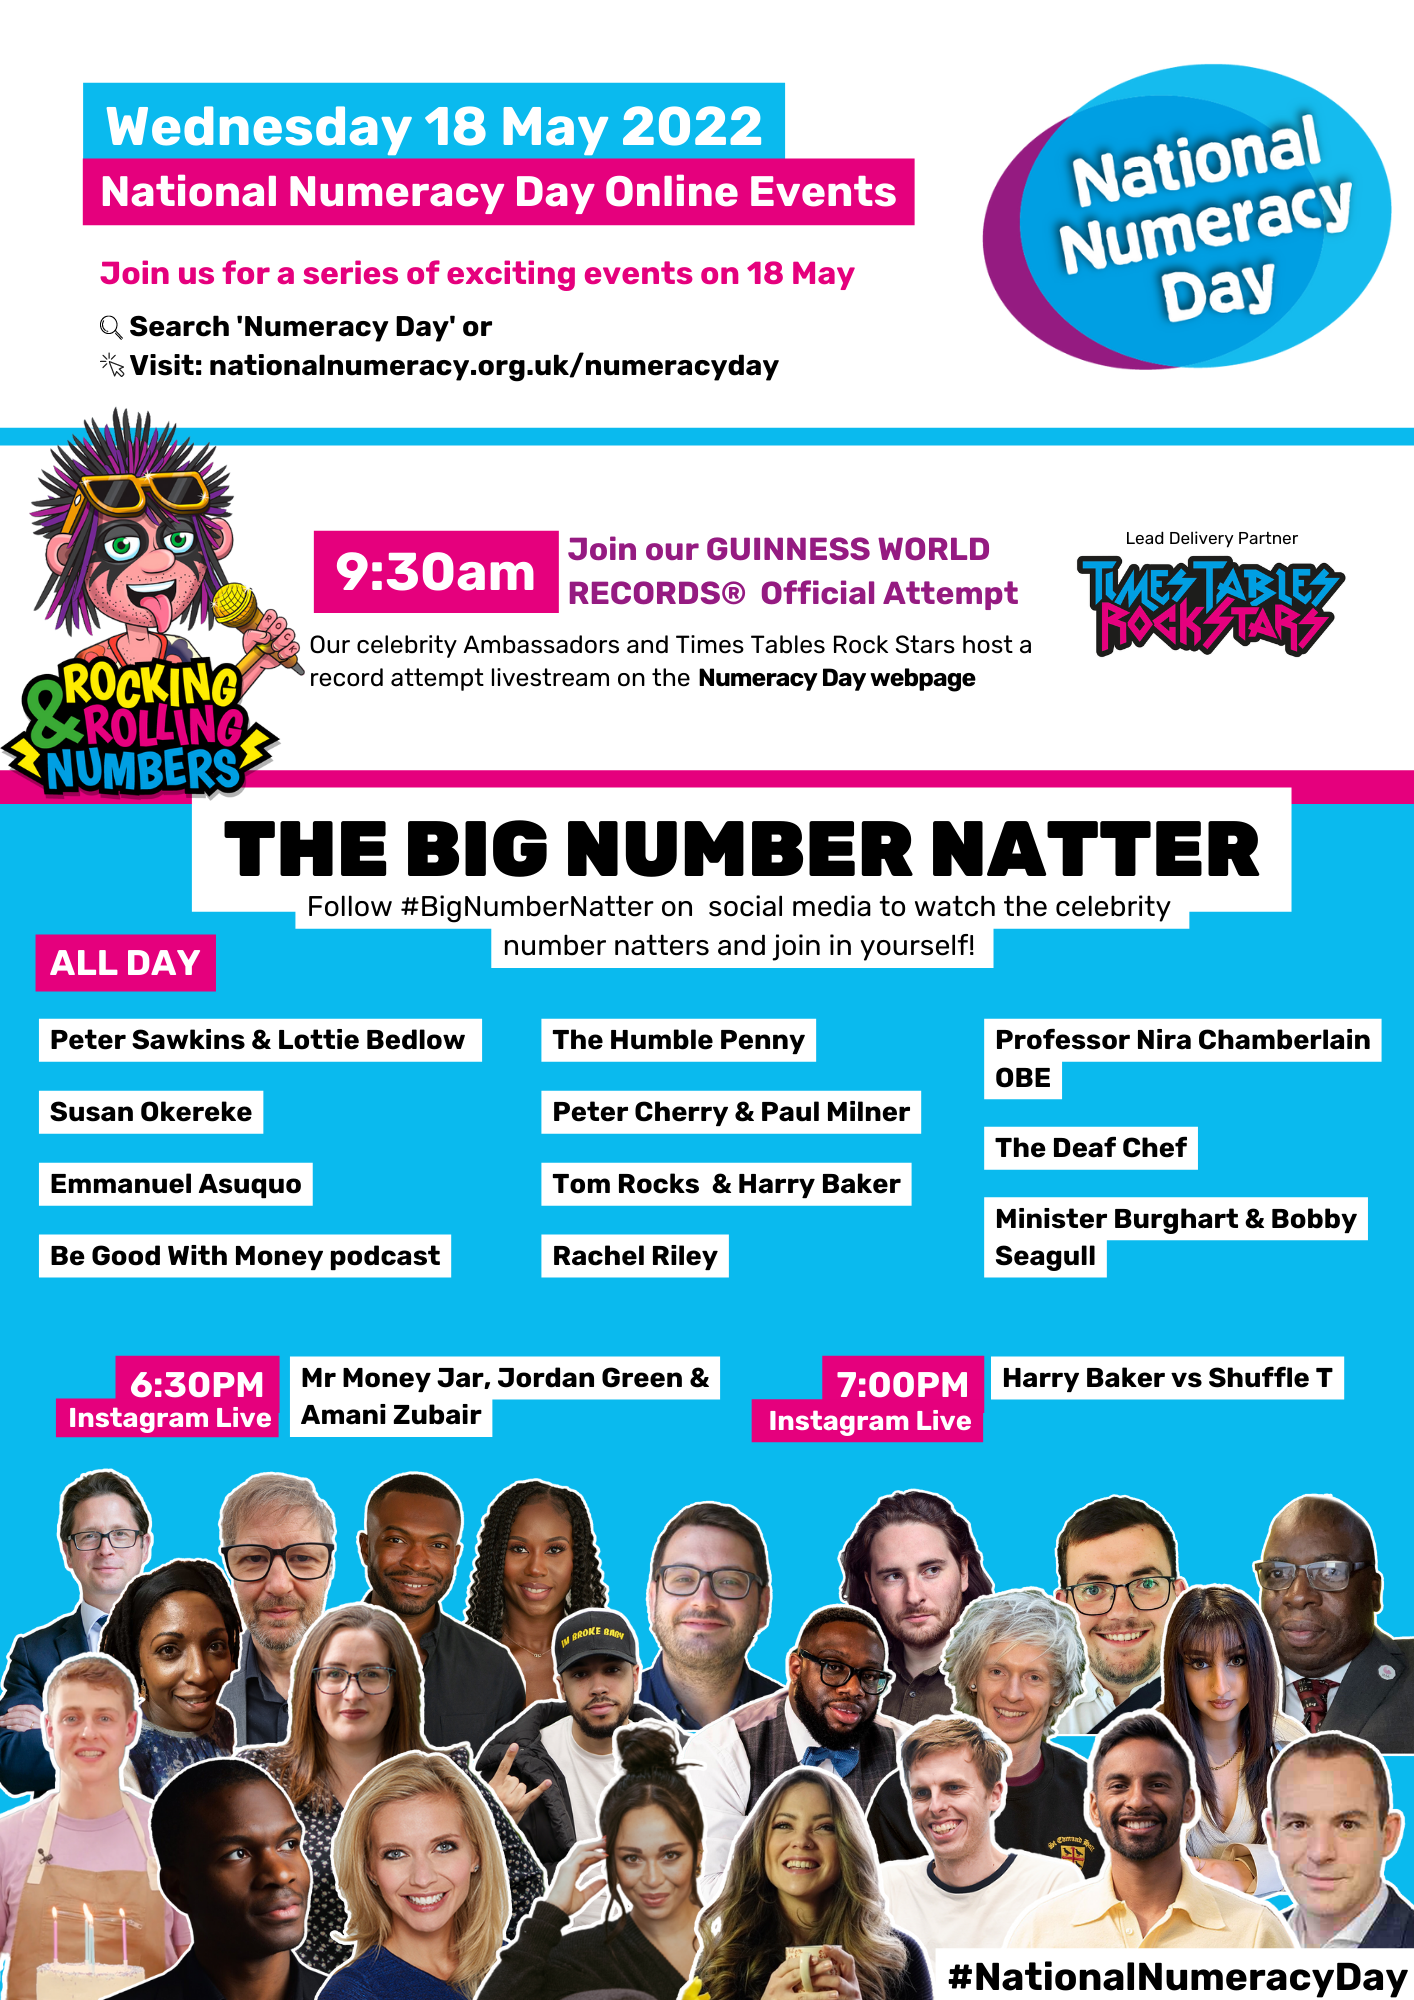 National Numeracy Day 2022 Online Events Poster